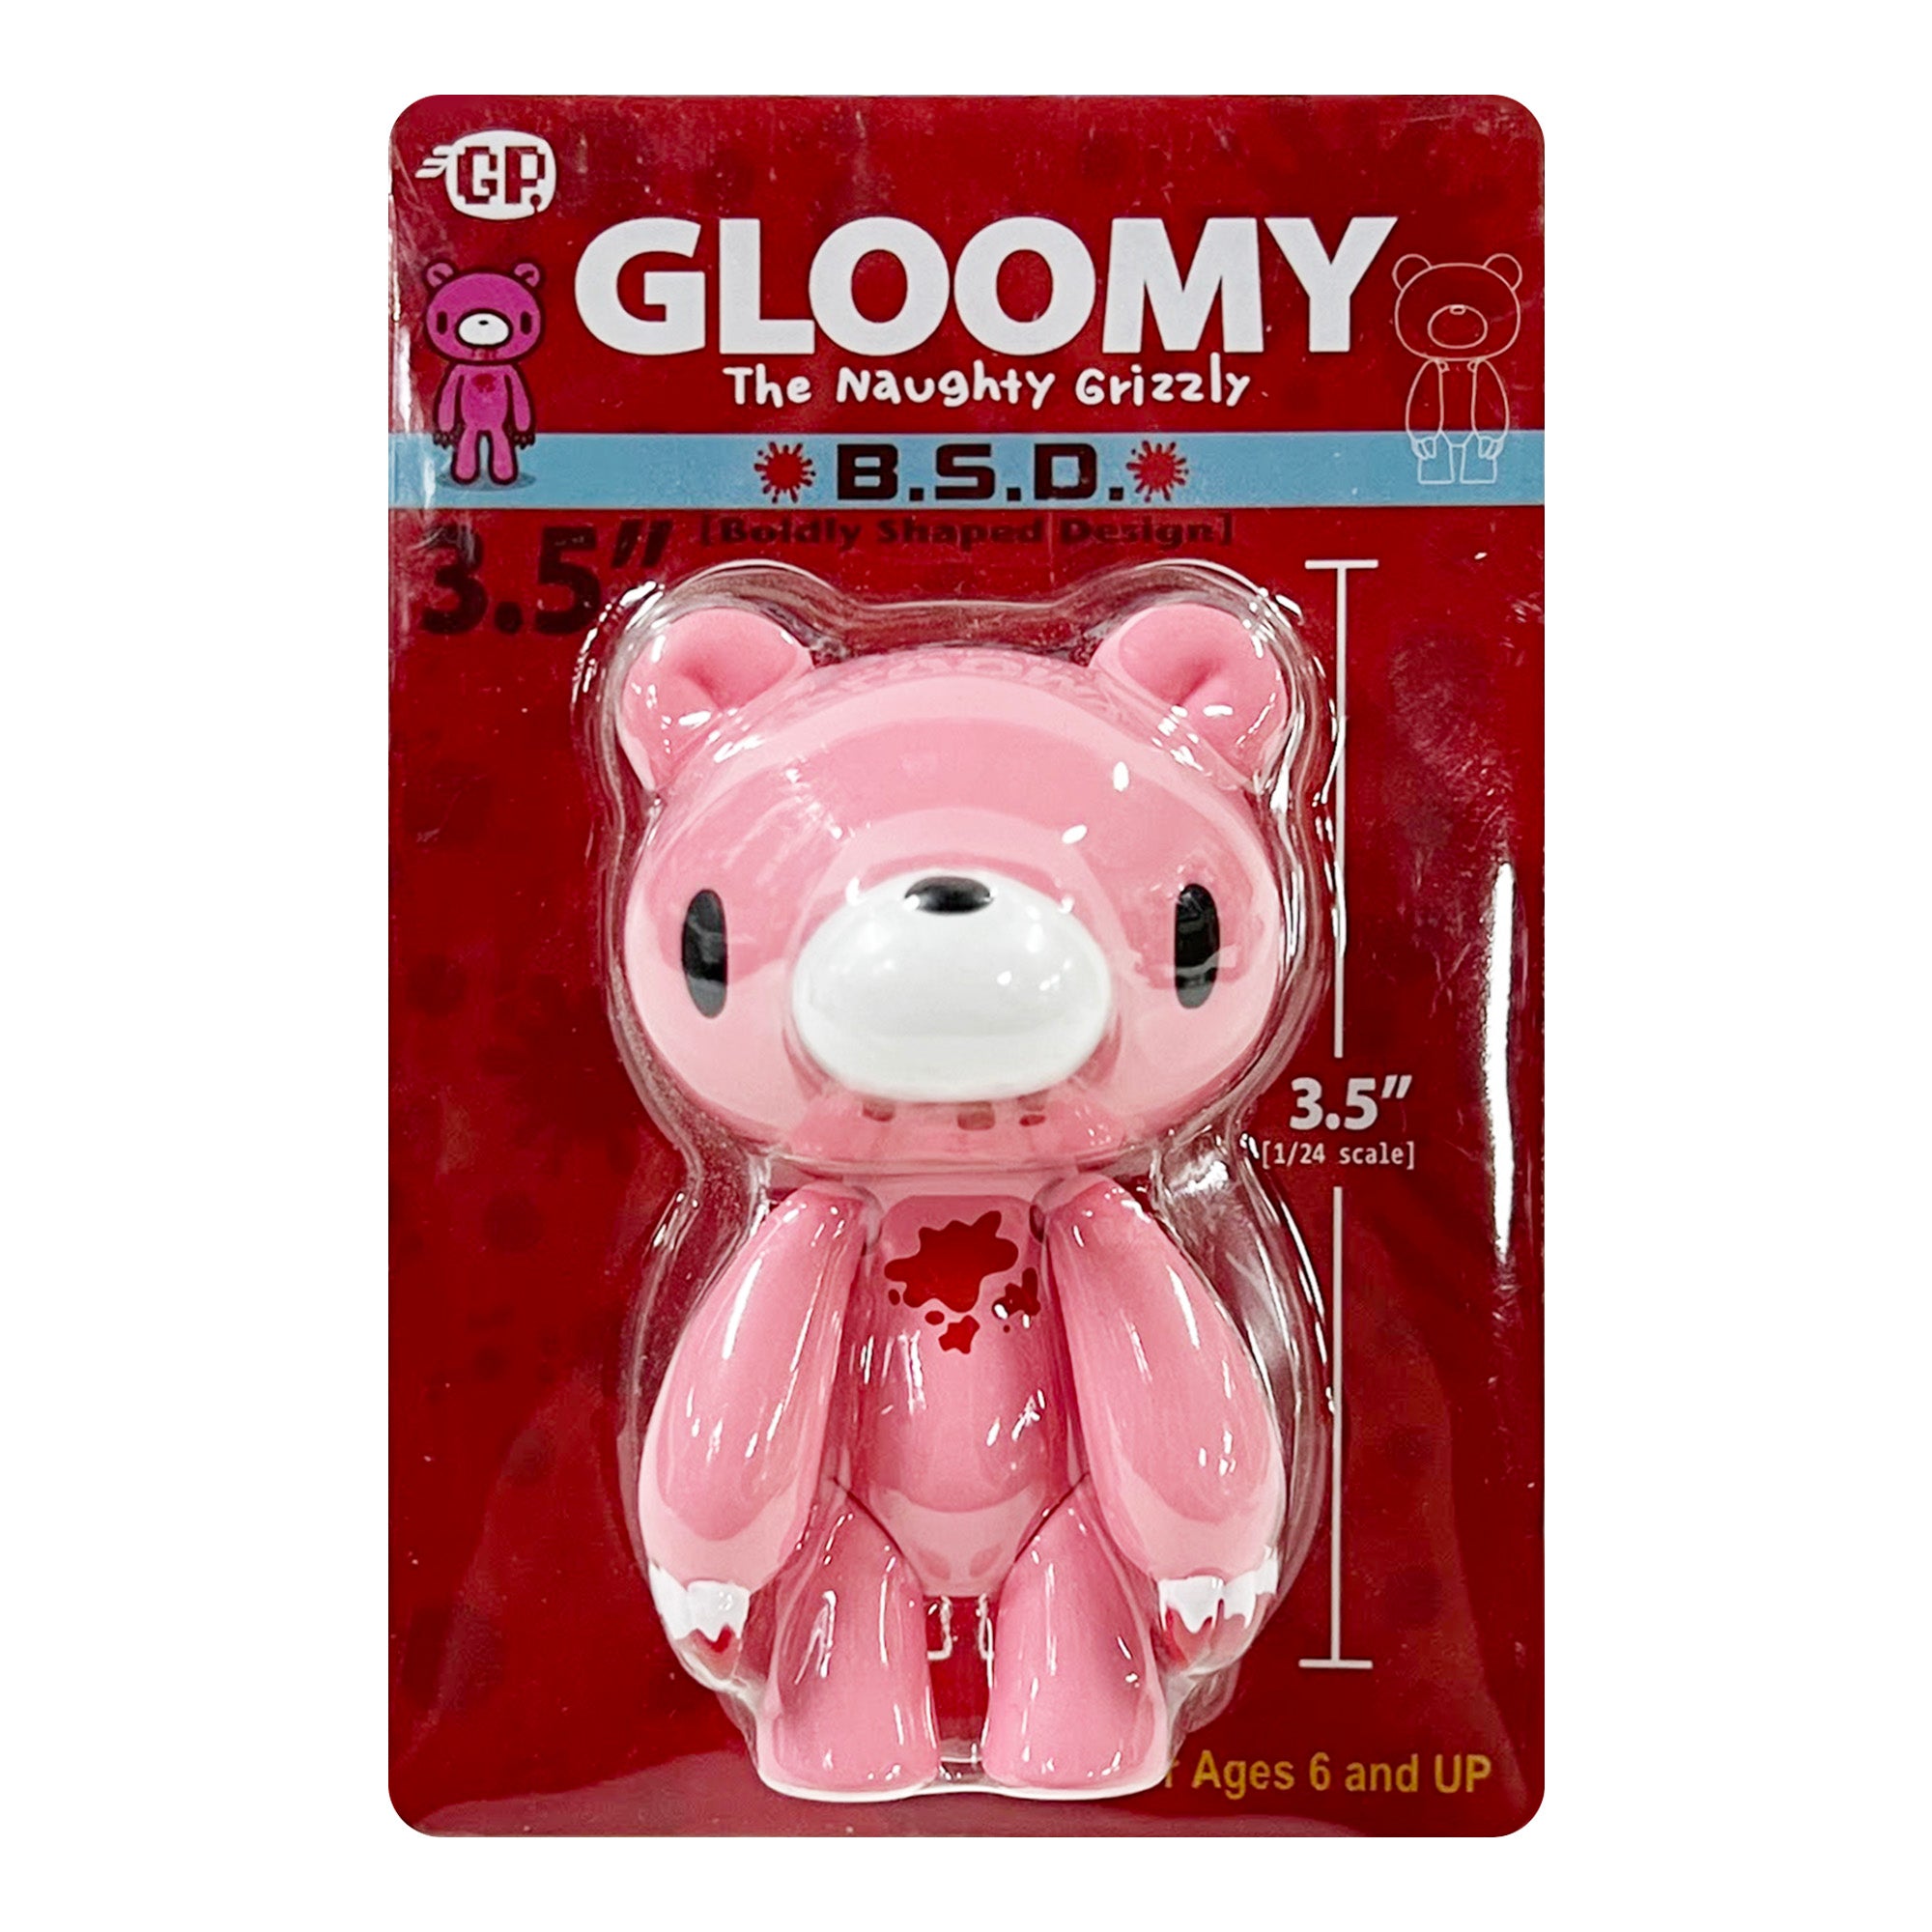 Gloomy The Naughty Grizzly: Boldly Shaped Design - Gloomy CGP-129 Pink 3.5  Tall Vinyl Figure